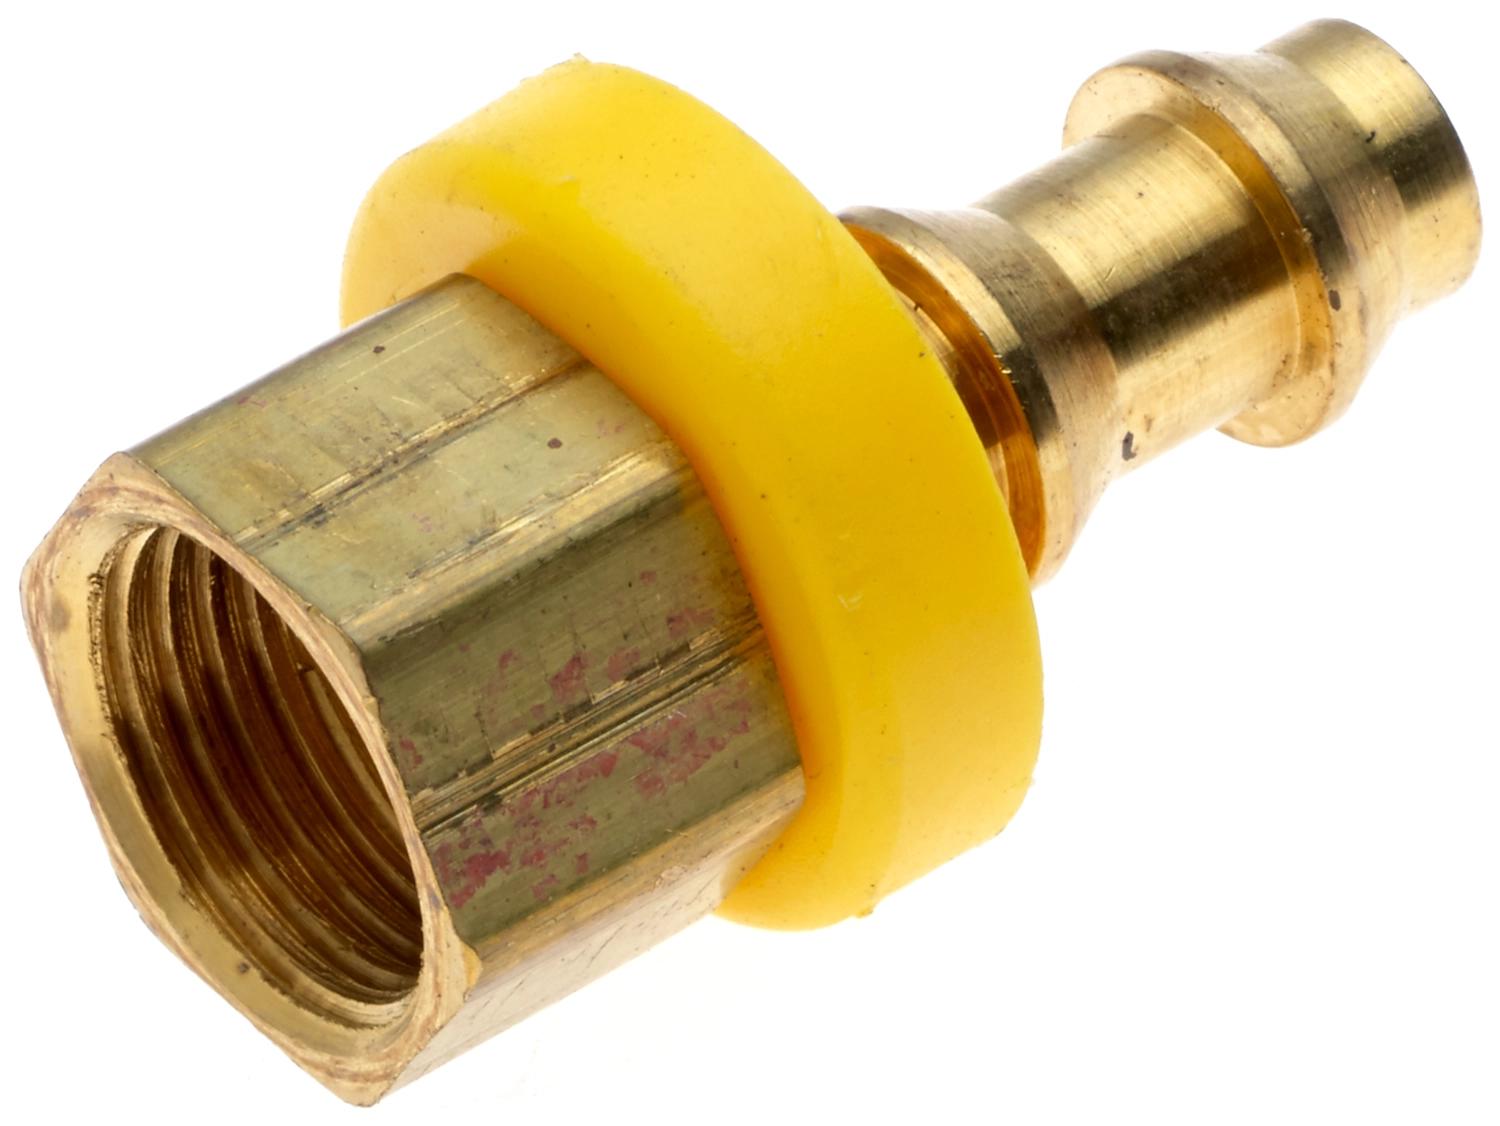 Gates G36508-0405/4LOC-5RFI Textile Braid Hose and Couplings Brass Lock-On Field Attachable Couplings for LOC and LOL Hose, G36508-0405 4LOC-5RFI 10004BA05 1/2-20 0.25 6.4 0.75 19.1 0.75 1 0.02